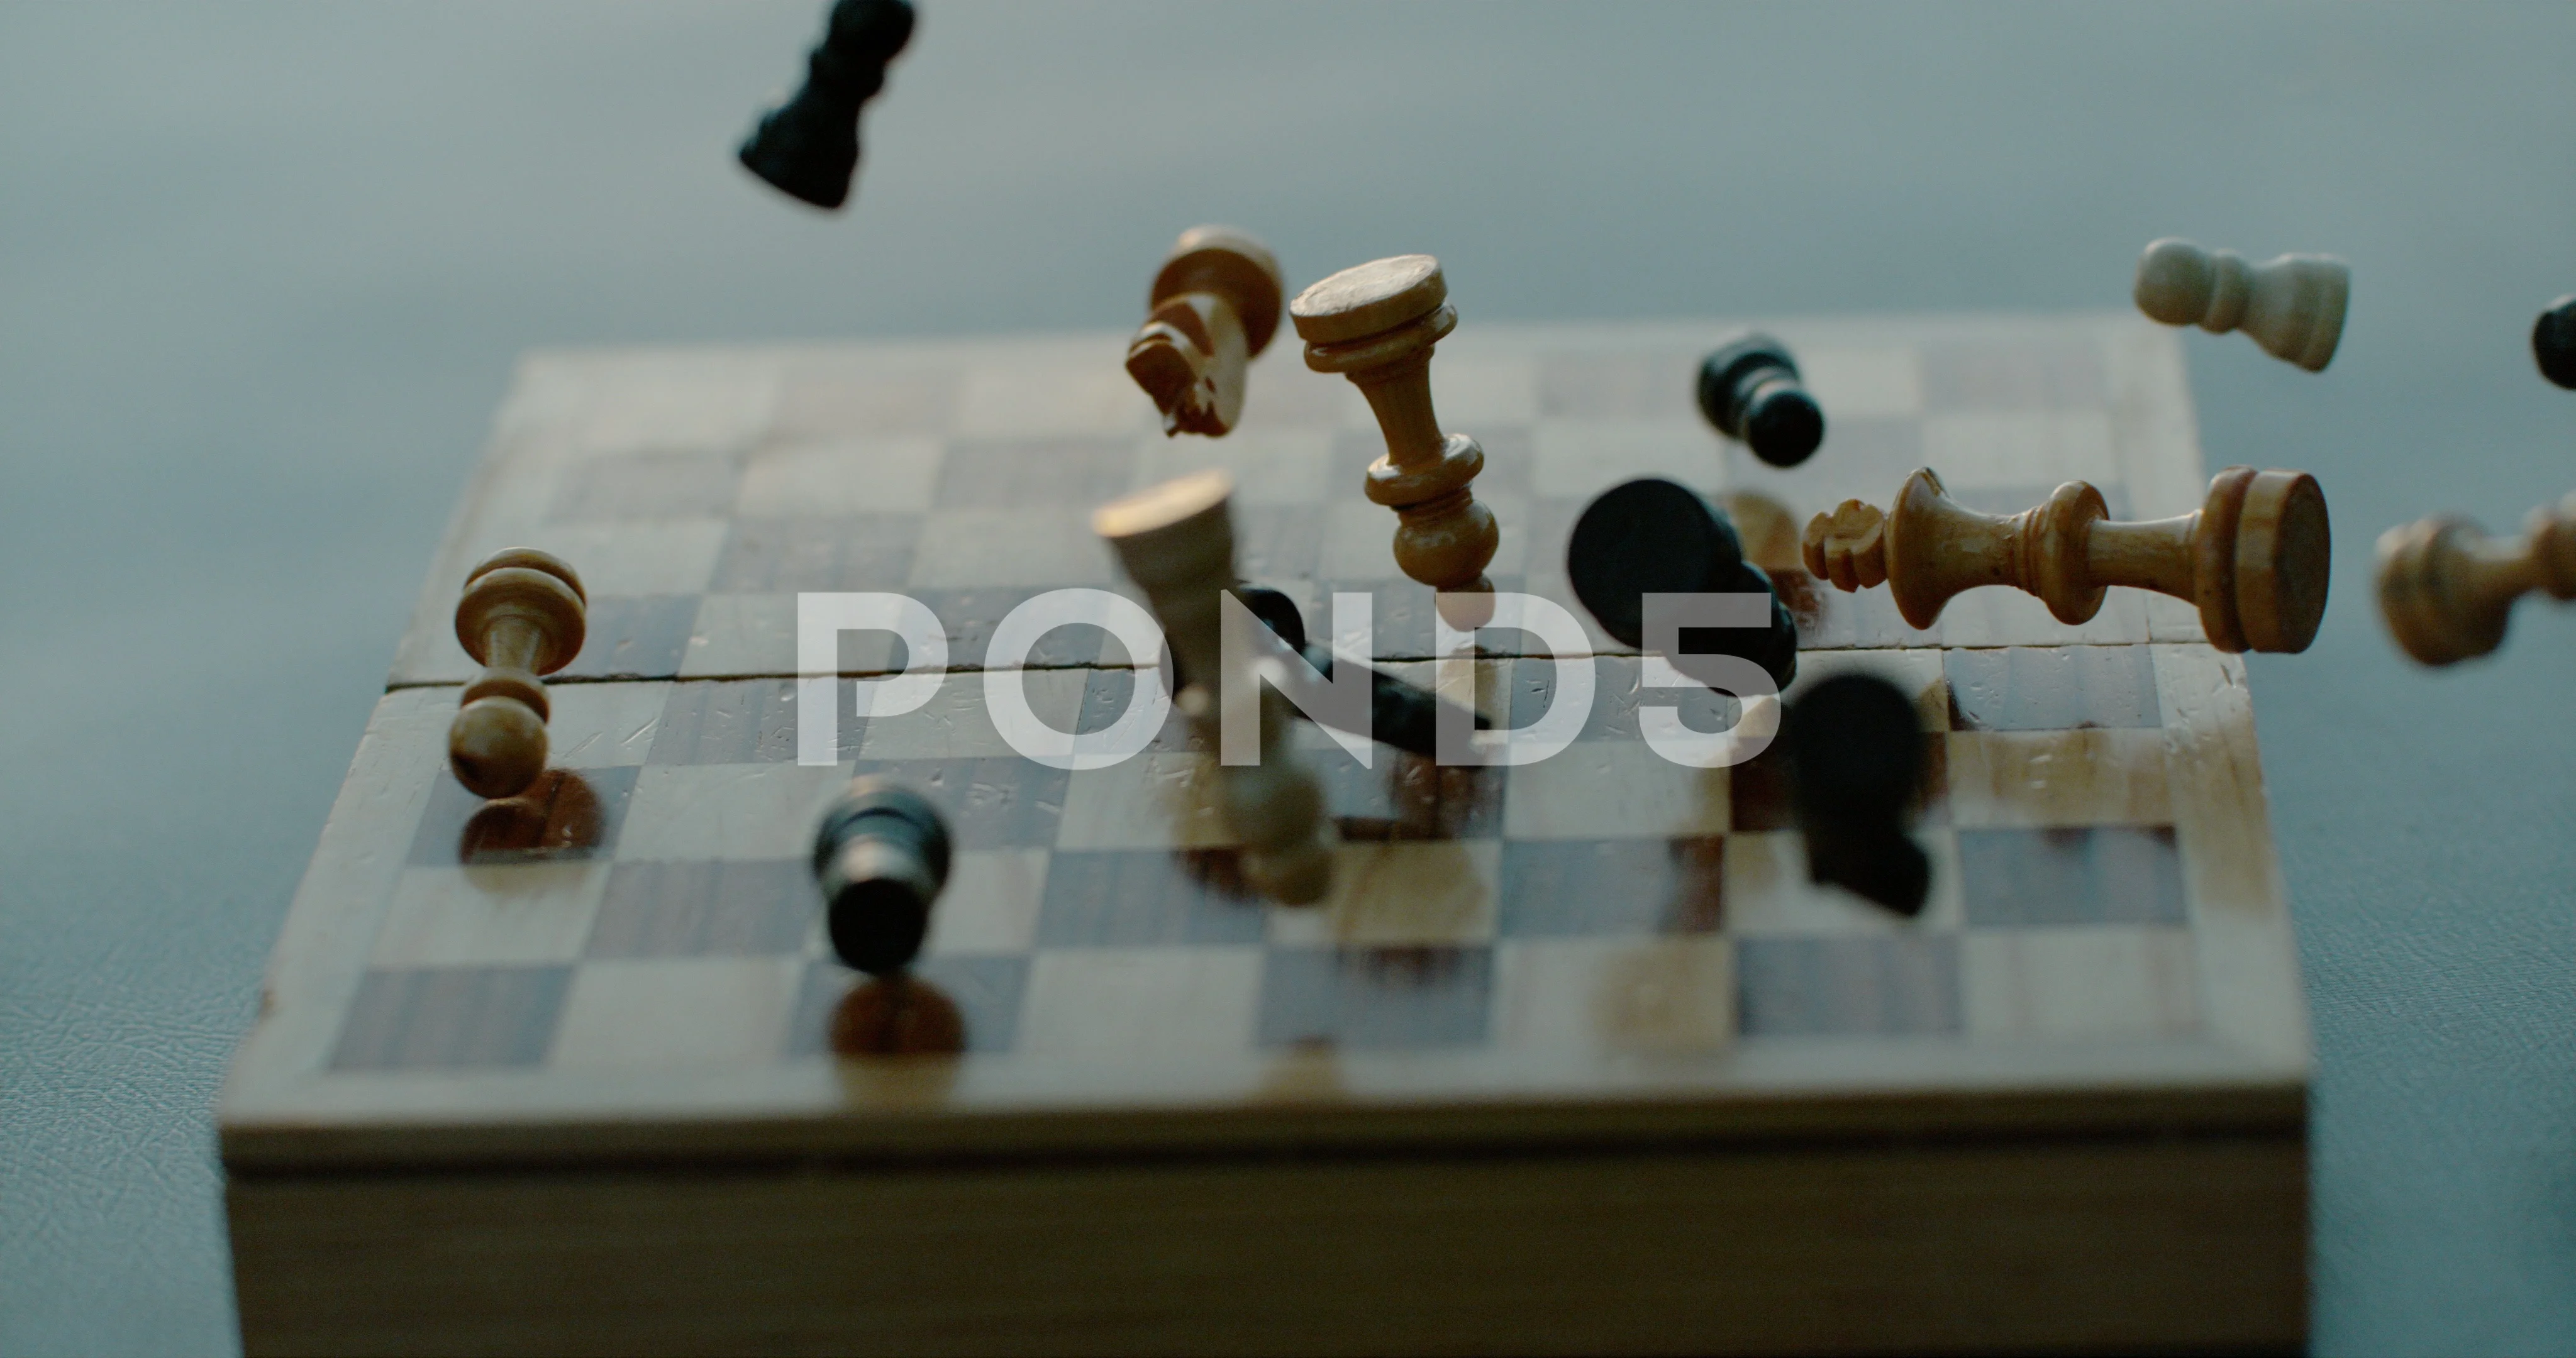 Super Slow Motion on the Chessboard Fall Wooden Chess Pieces